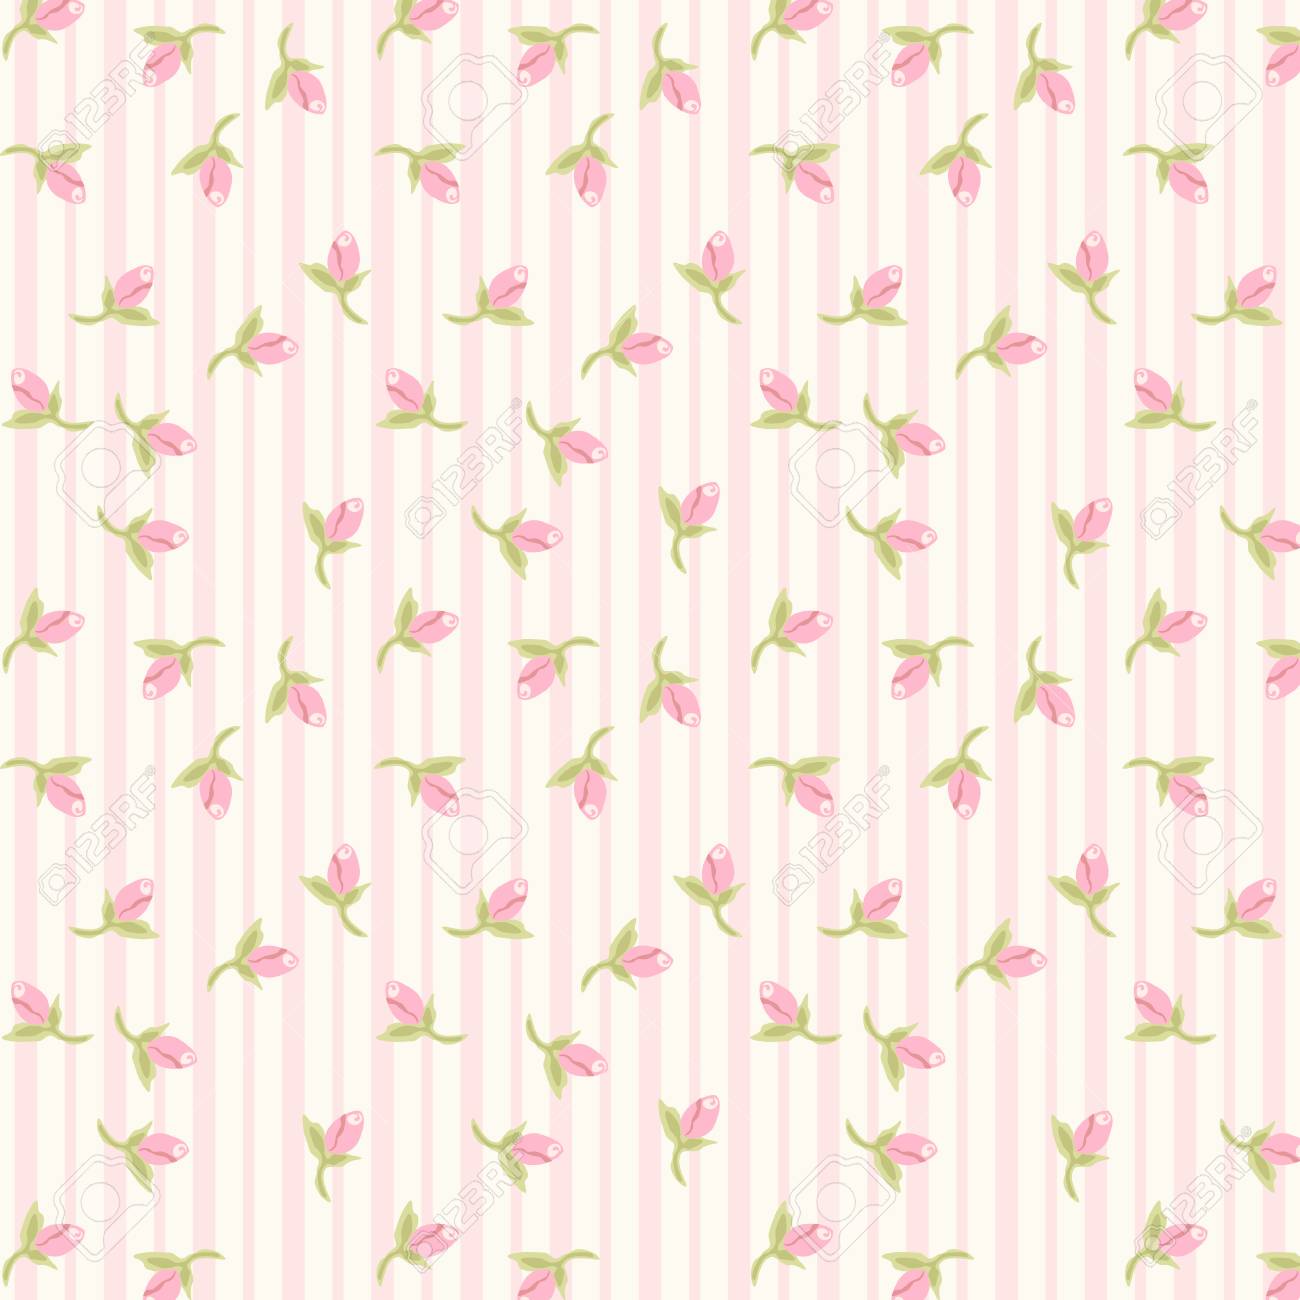 Cute Vintage Shabby Chic Floral Background For Your Decoration